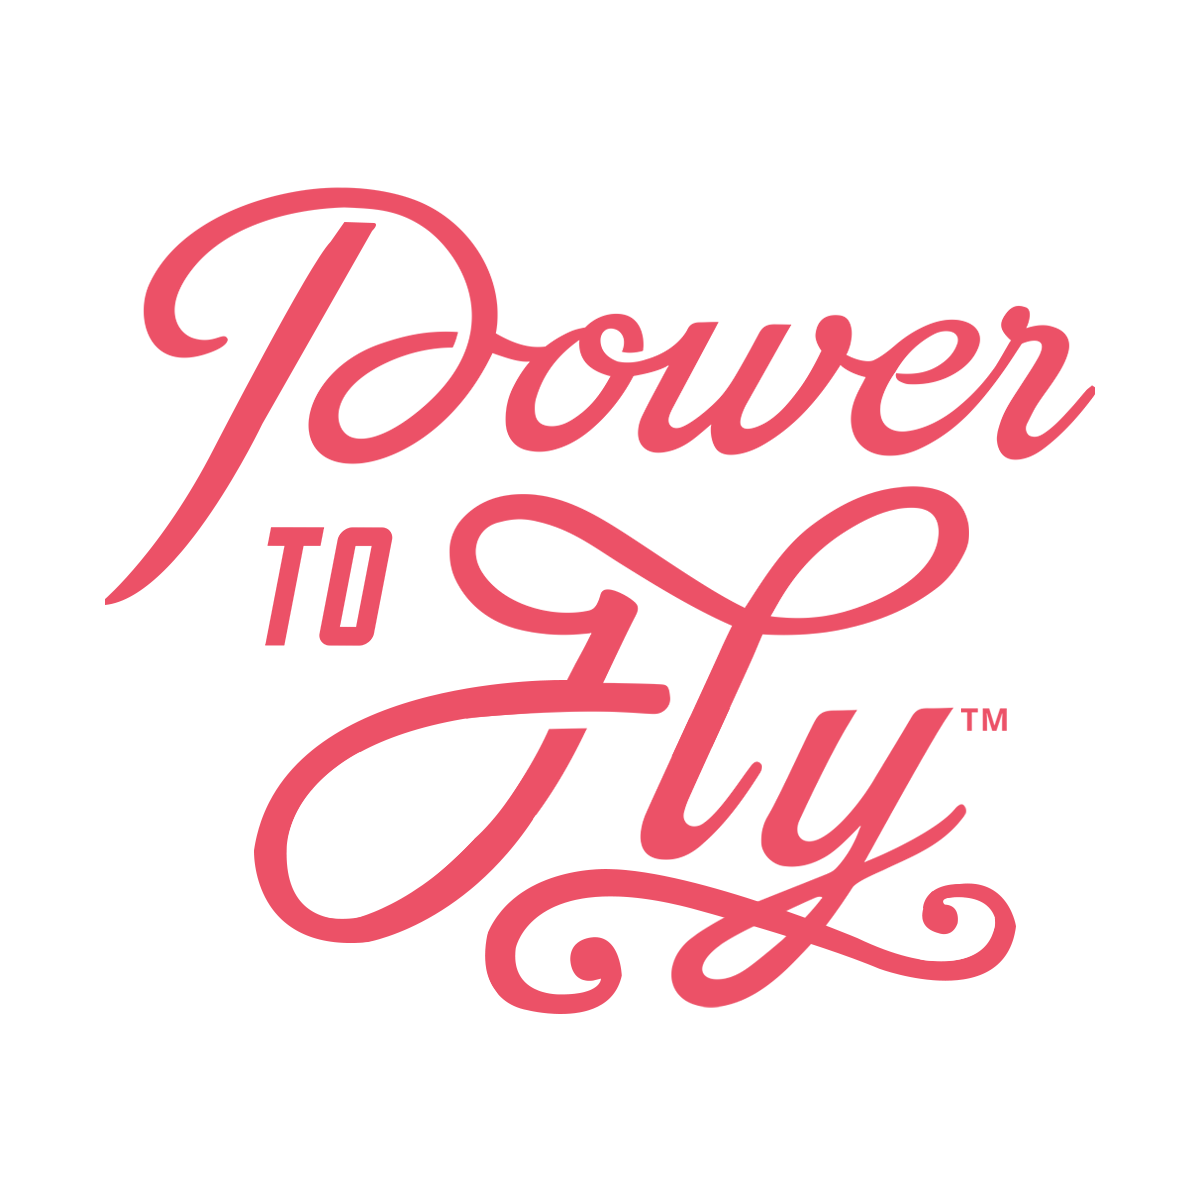 Power to Fly